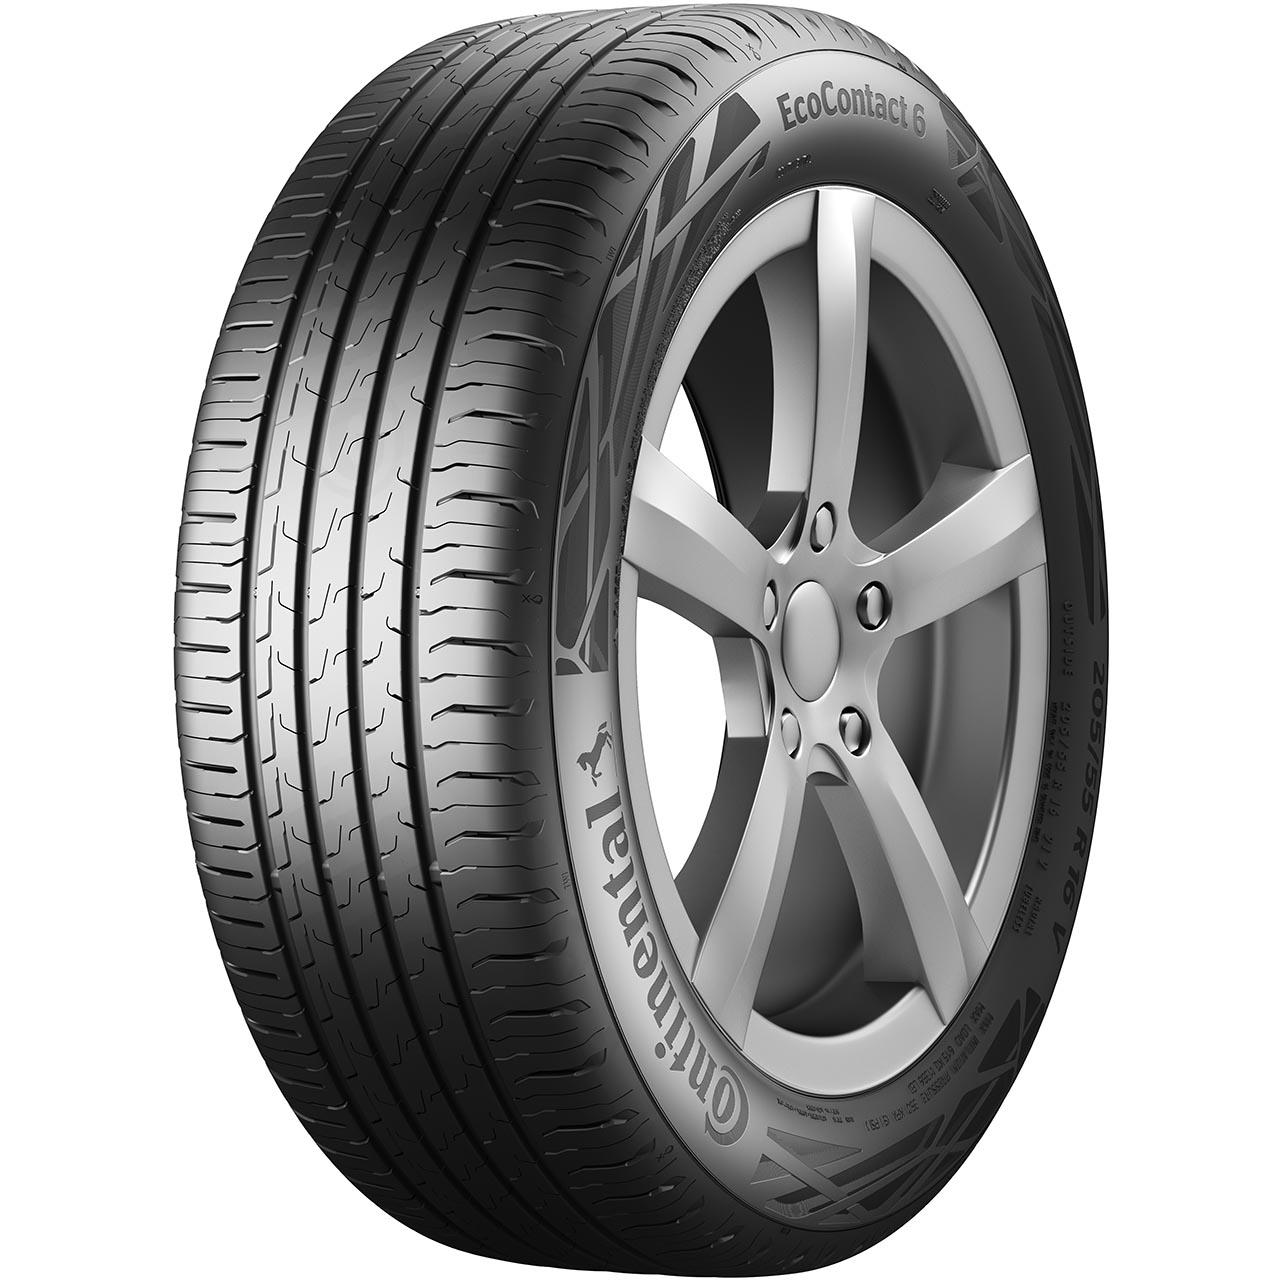 Continental ECOCONTACT 6 295/40R20 110W XL MGT